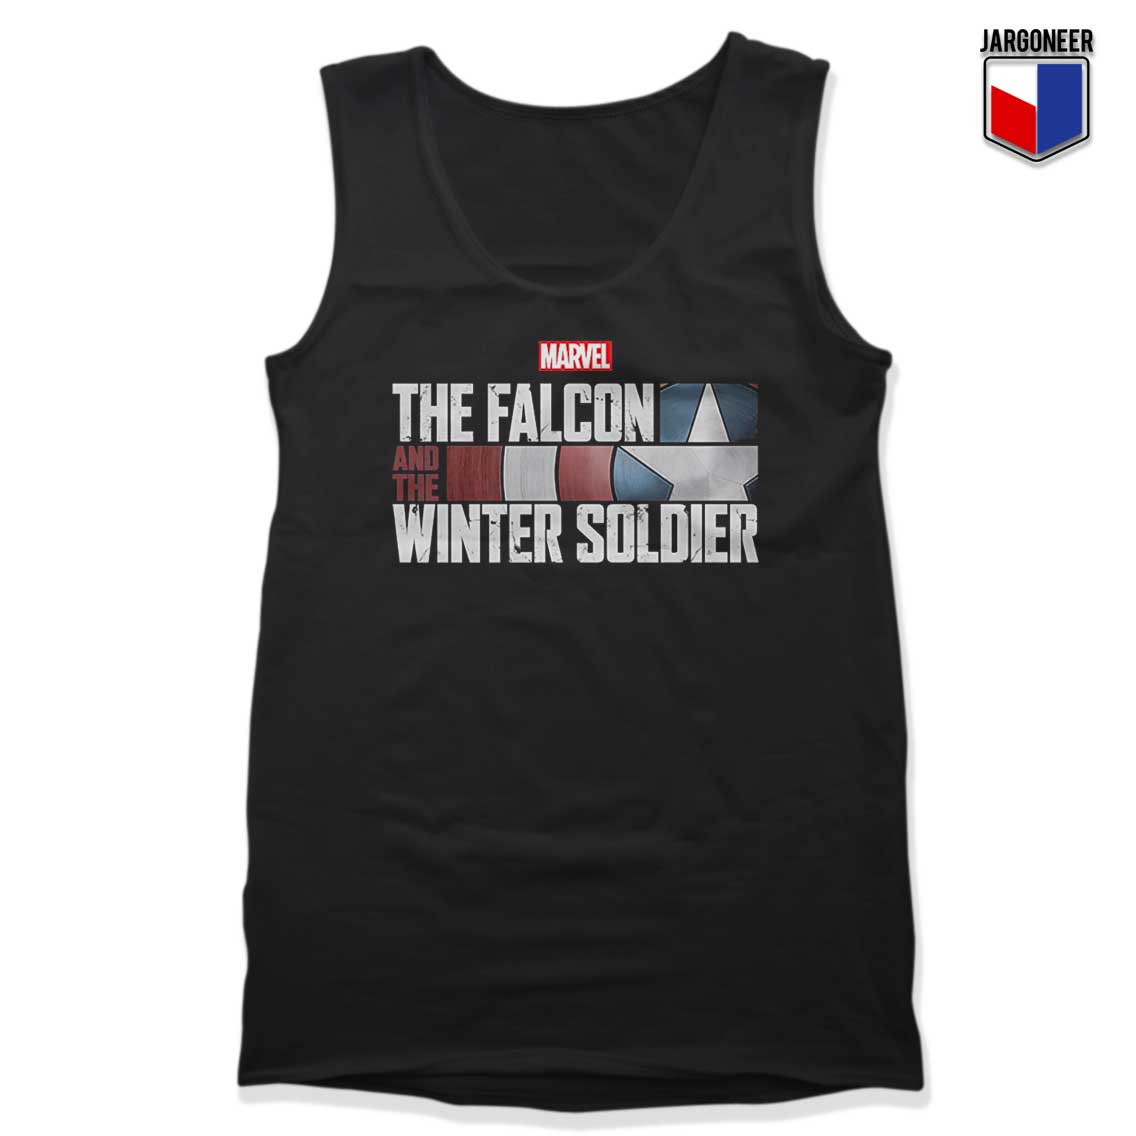 The Falcon And The Winter Soldier Tank Top - Shop Unique Graphic Cool Shirt Designs